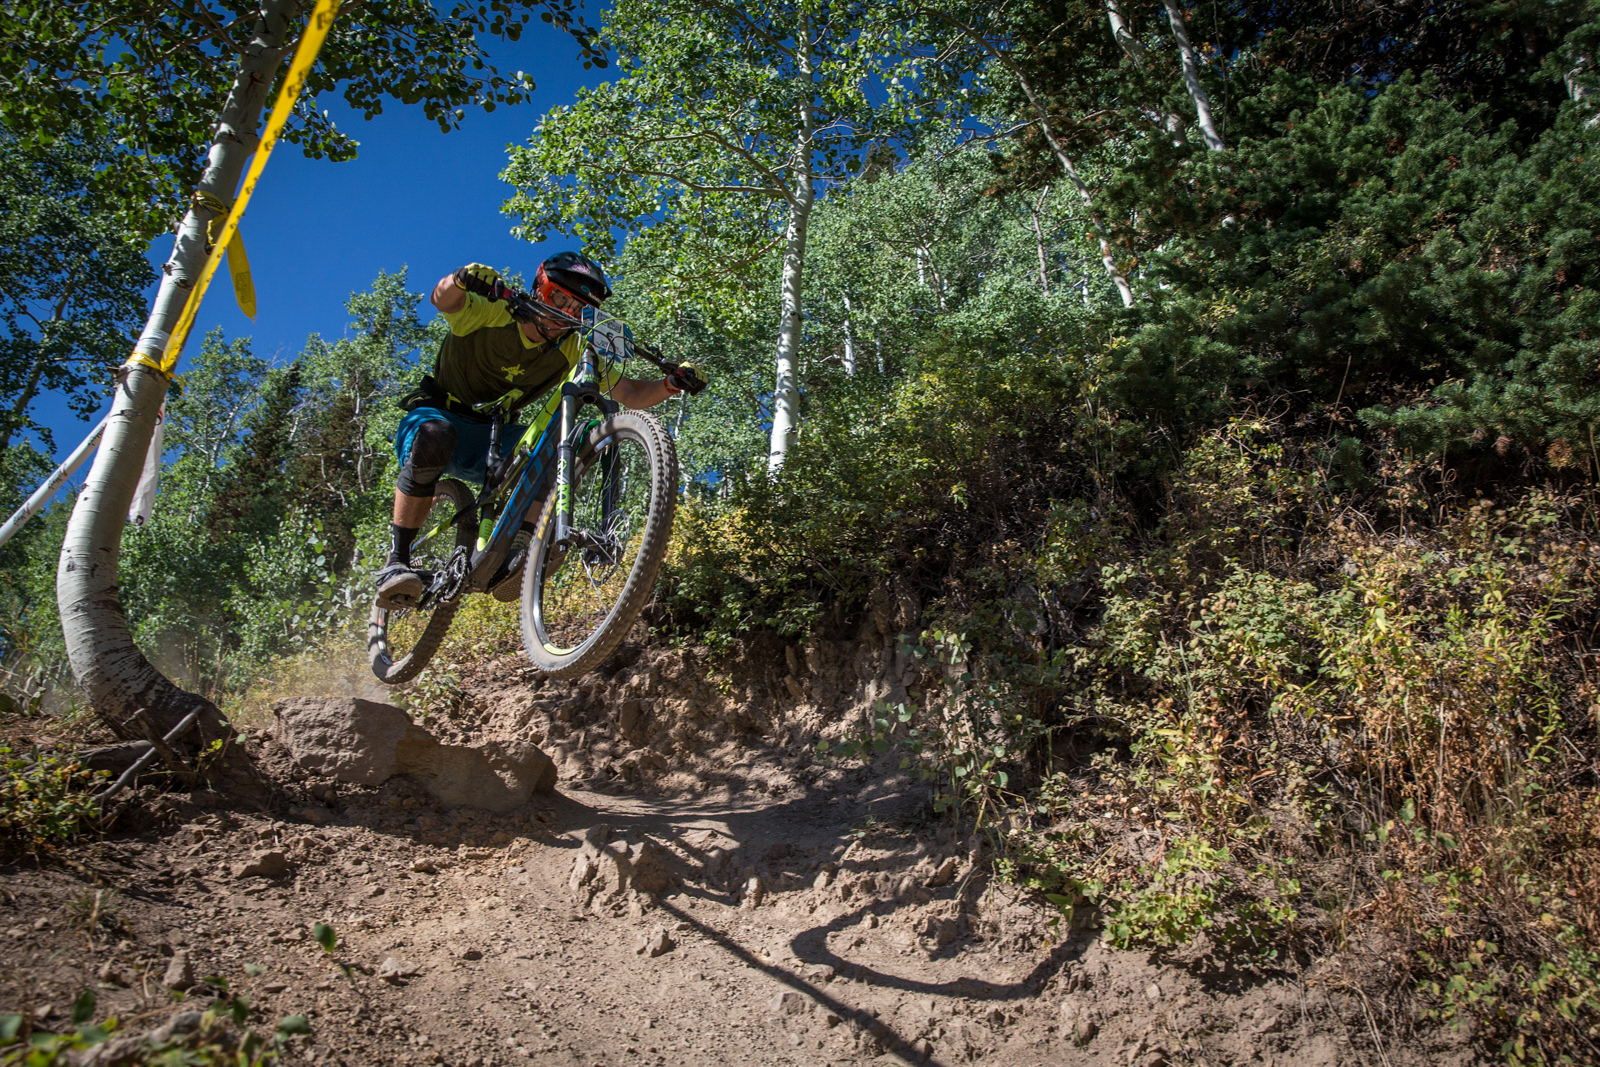 Naish Ulmer races Stage Two of the SCOTT Enduro Cup at Deer Valley Resort in Park City, UT on Aug. 28, 2016